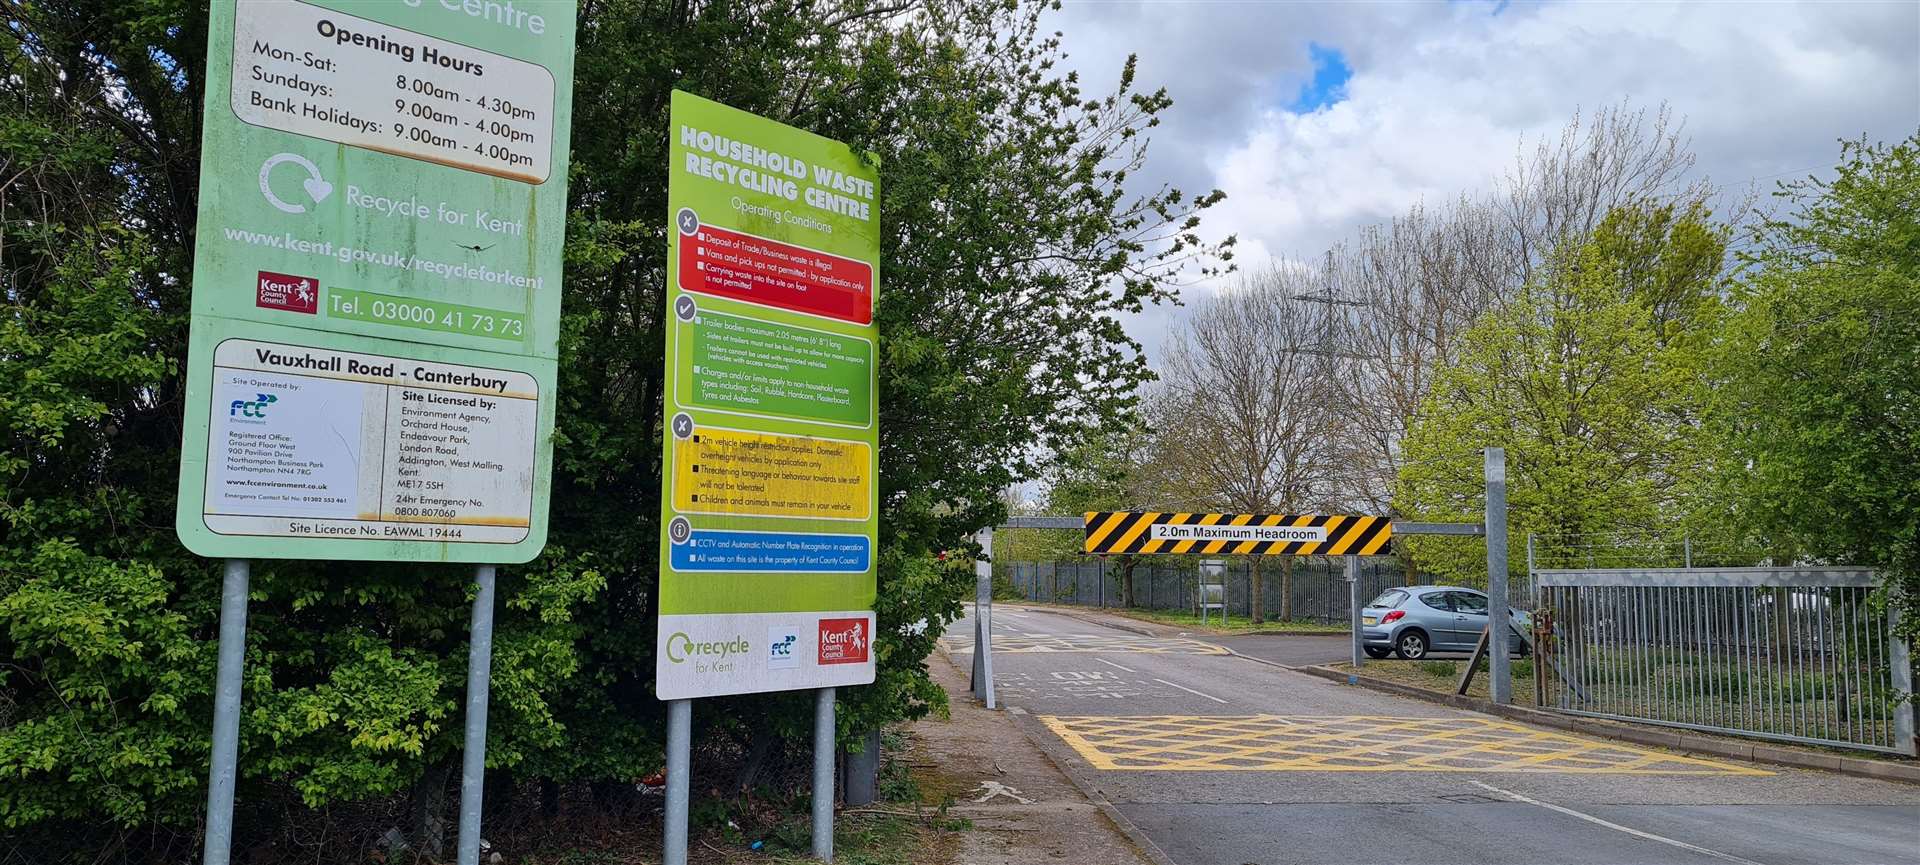 The household waste recycling centre in Canterbury